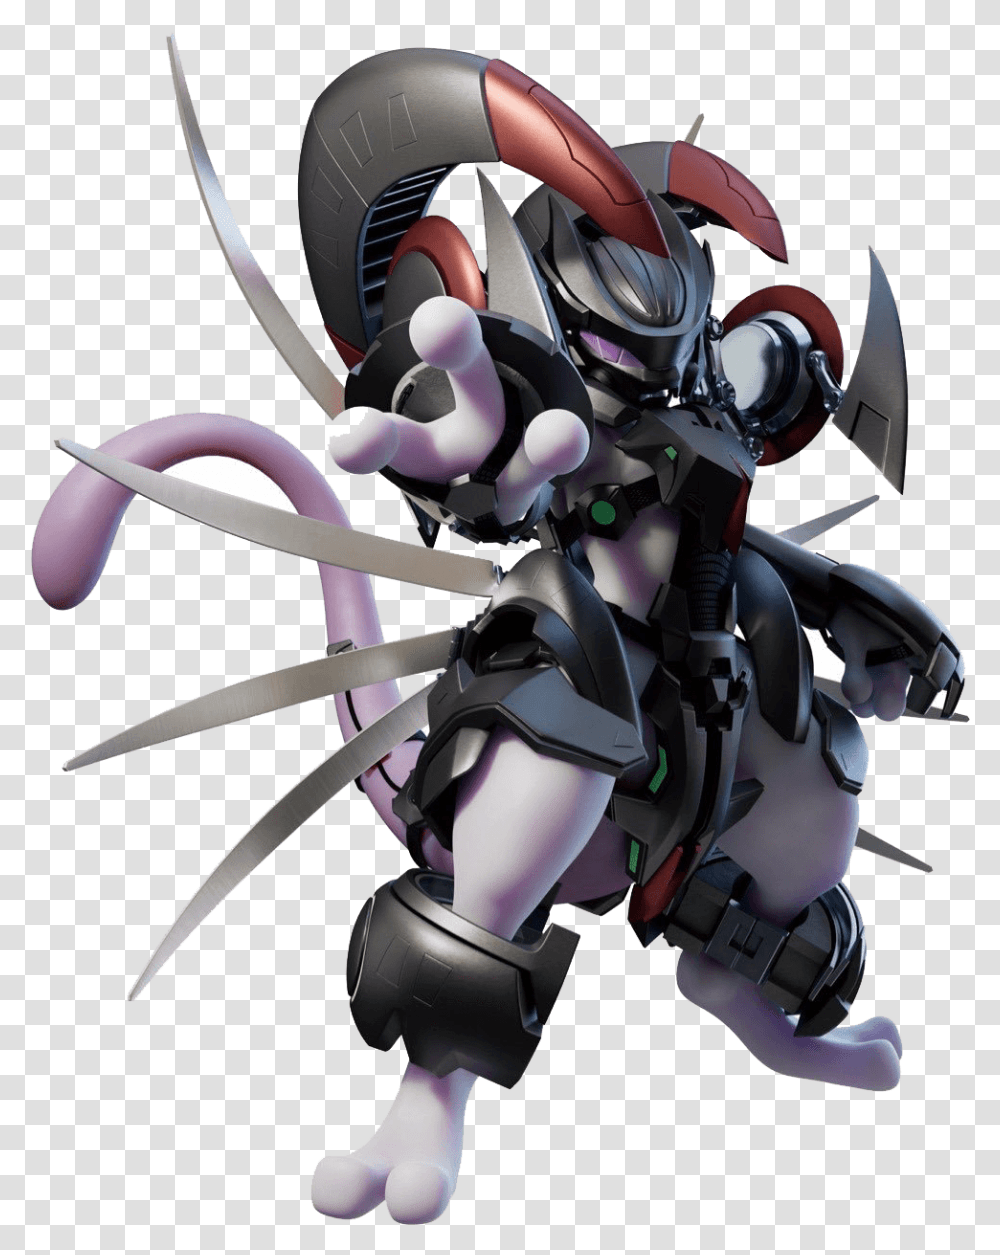 Armored Mewtwo Pokemon Go, Toy, Helmet, Weapon Transparent Png